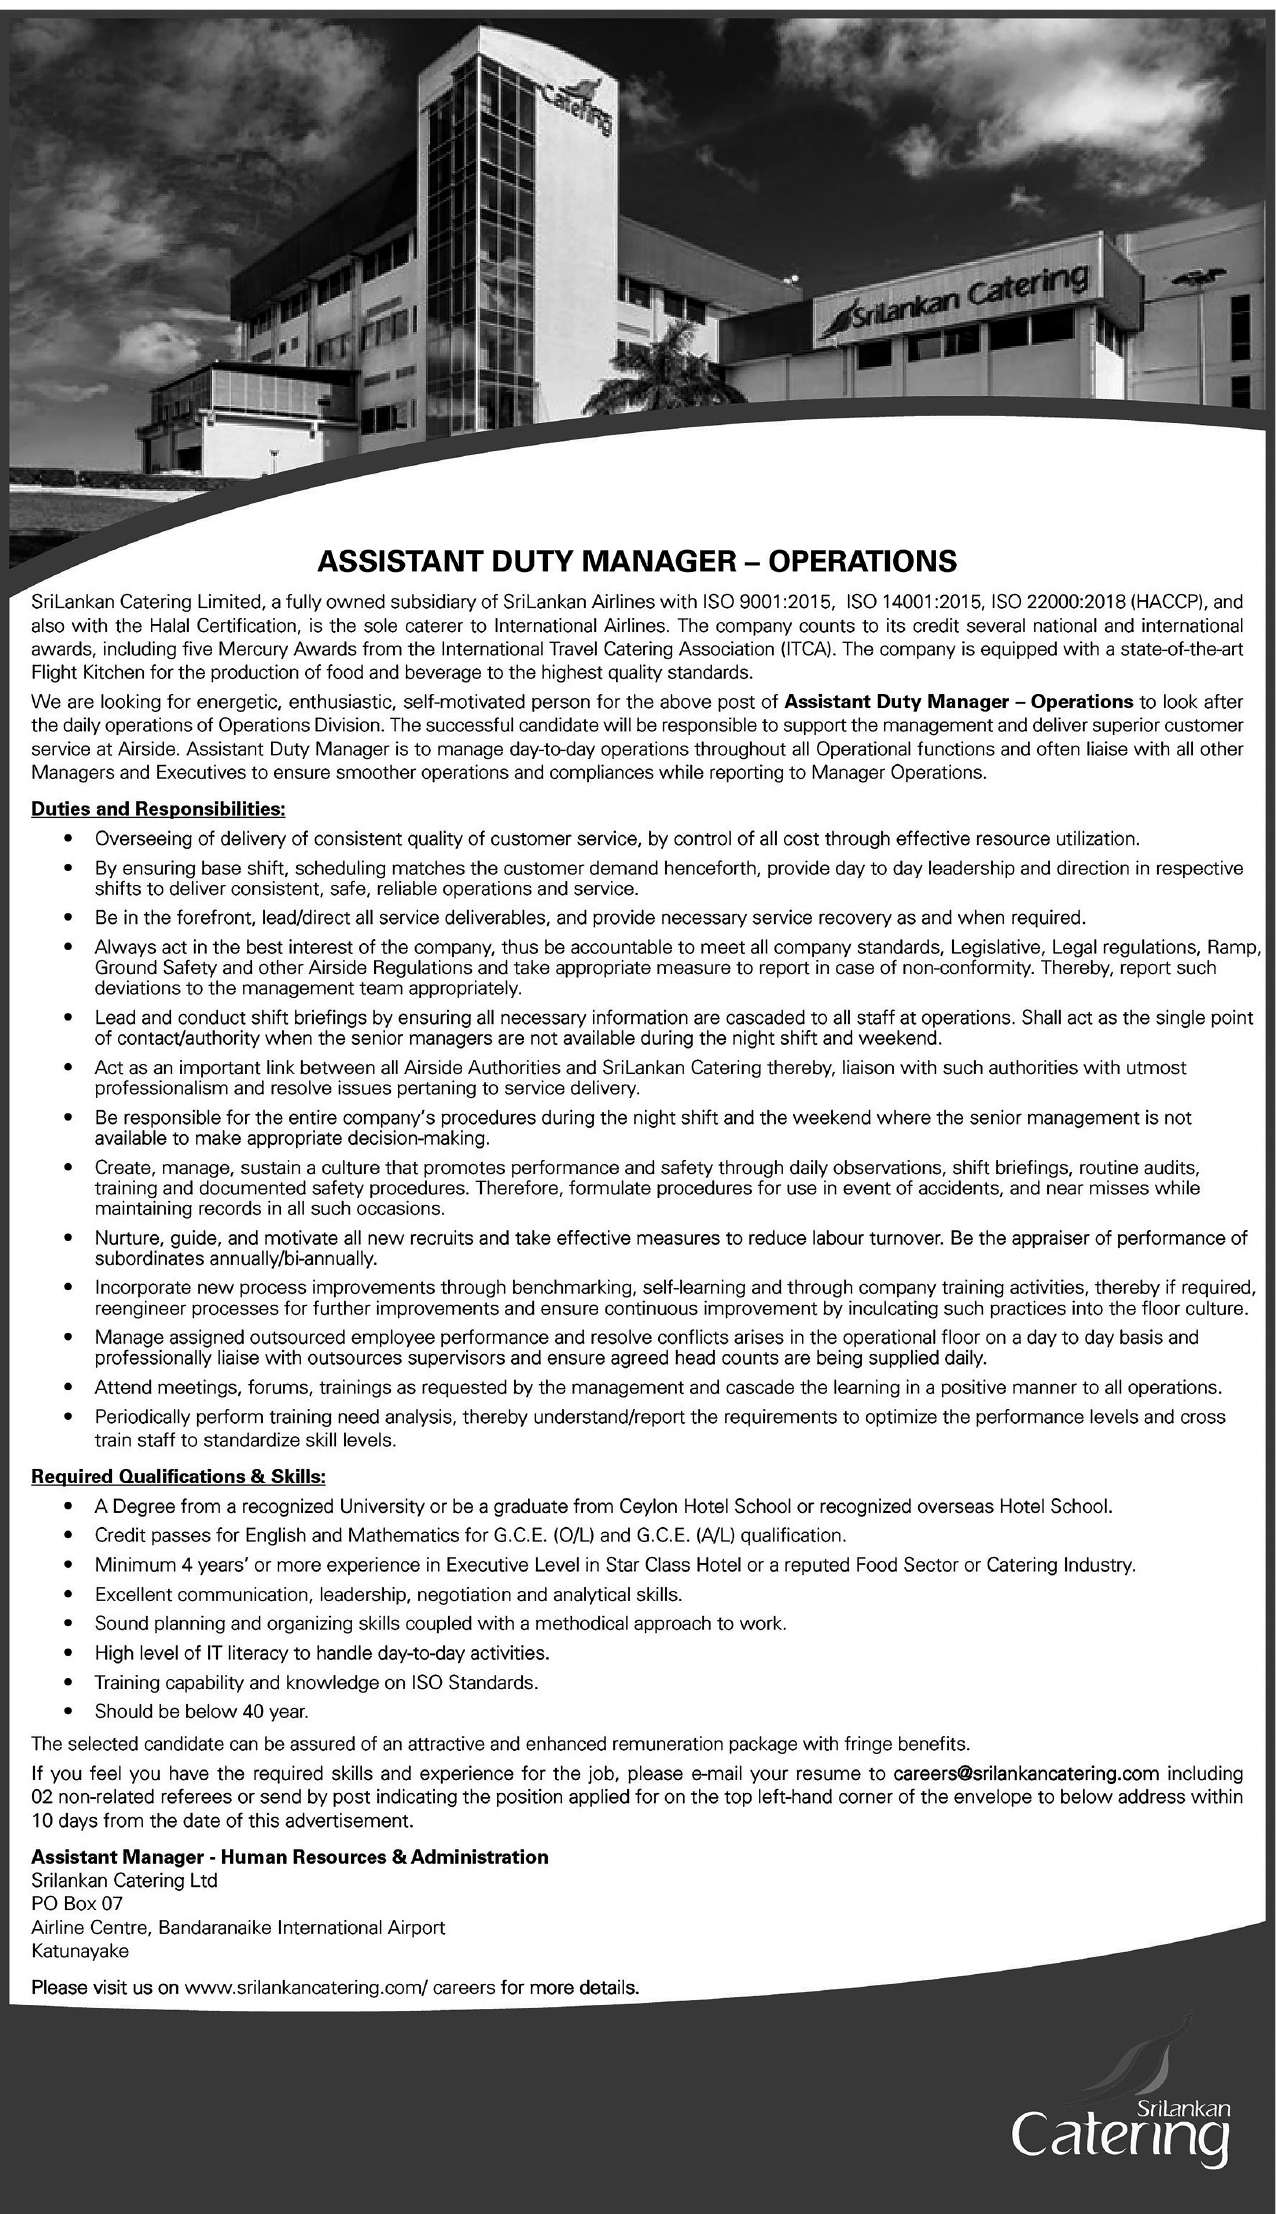 Assistant duty Manager - Operations